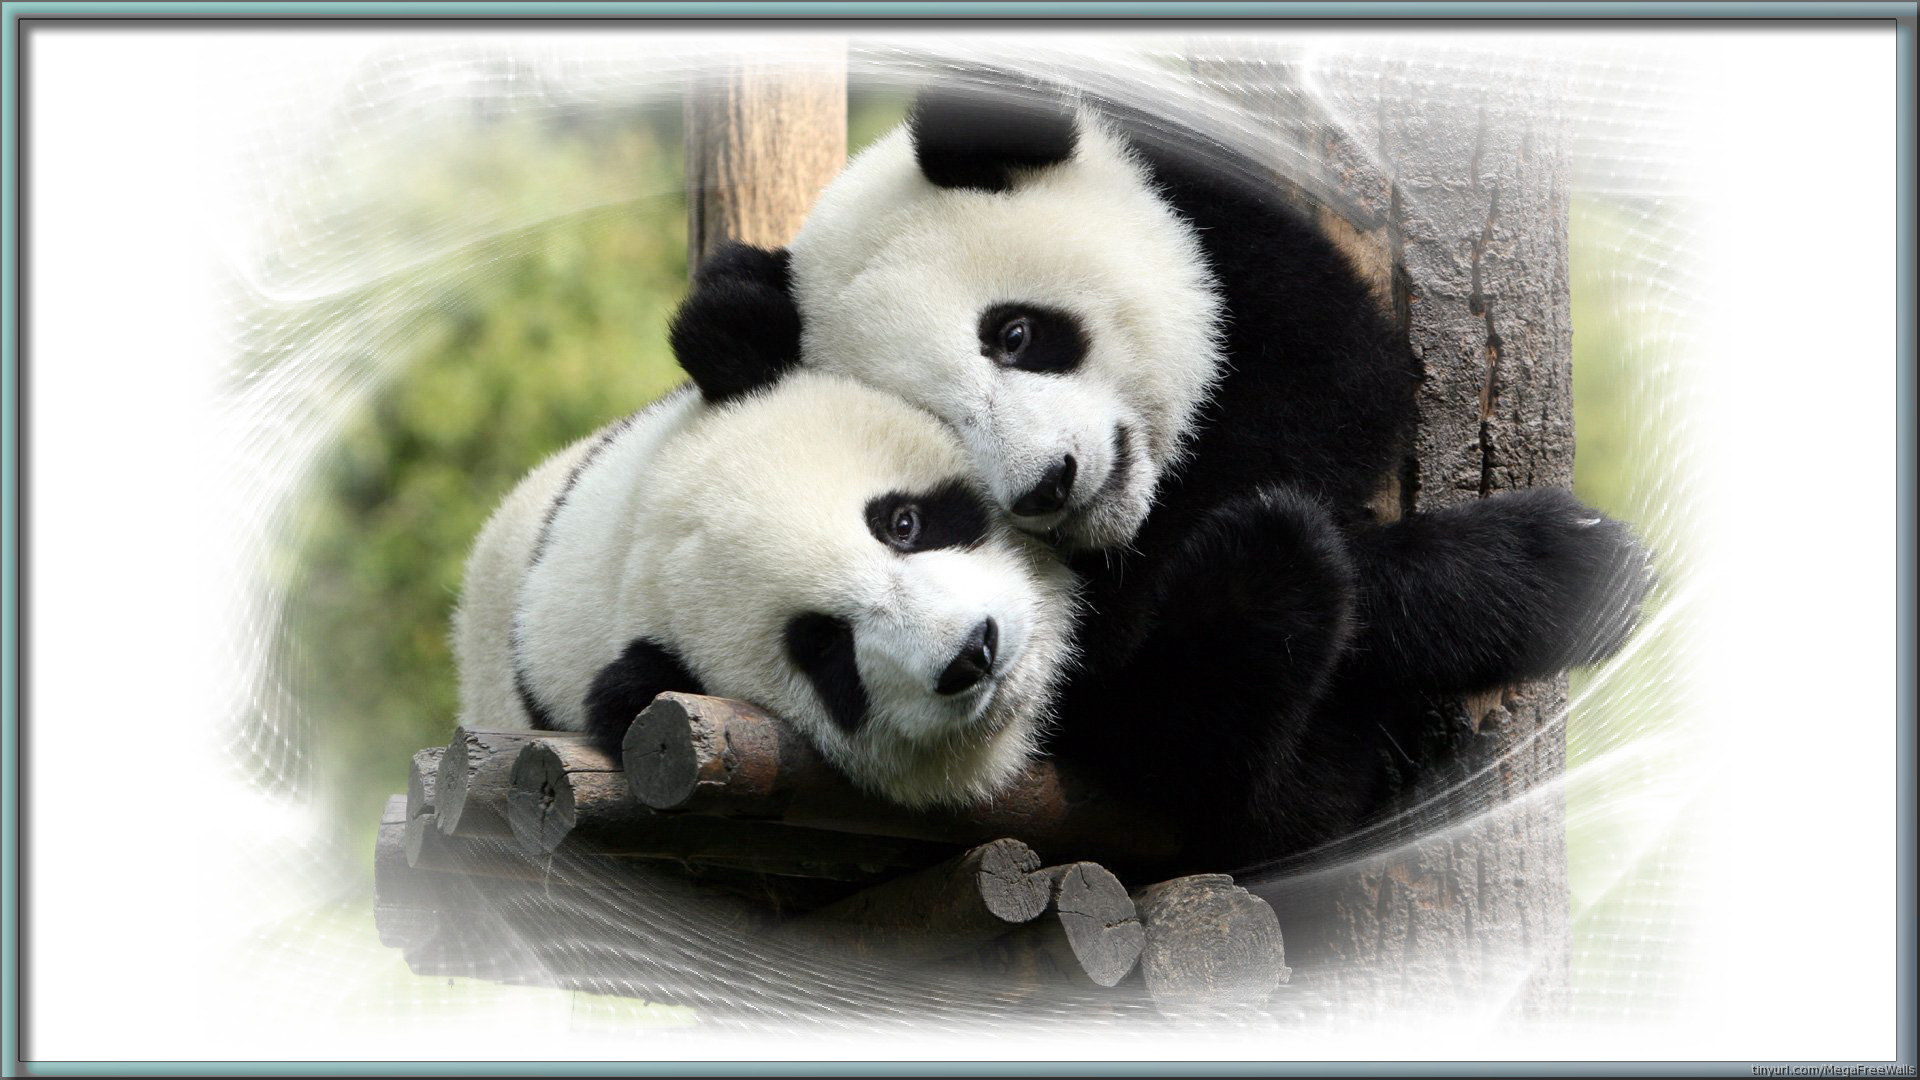  Panda  Backgrounds  Pictures Images